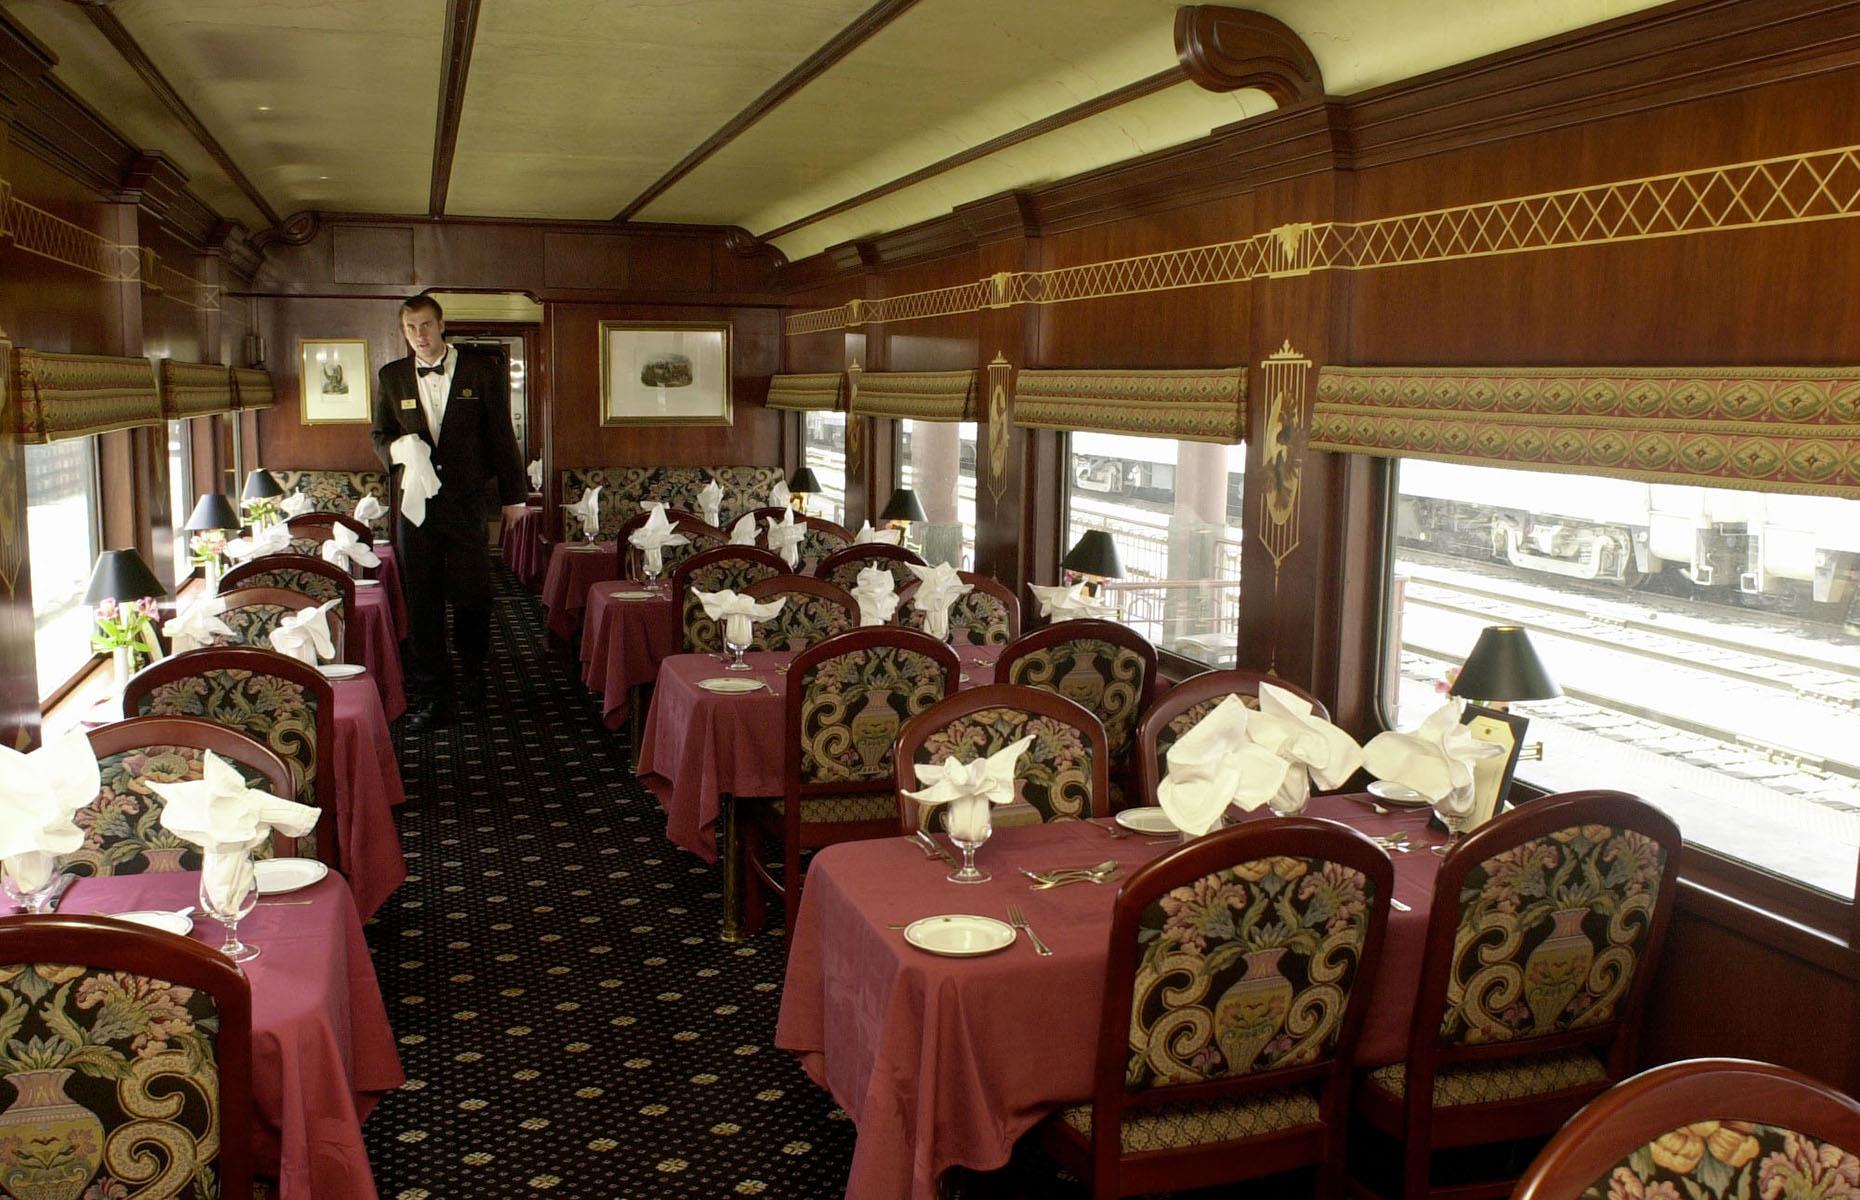 <p>A new incarnation of the famous train, the American Orient Express, formerly the American European Express, operated between 1989 and 2008. A private luxury train operating under Amtrak, it offered its passengers an all-inclusive journey with meals, entertainment and hotel stays along the route. The 1940s and 1950s-era passenger cars cost nearly £12 million ($15m) to restore and tickets were priced up to £7,973 ($10,000) per person one way. Now take a look at <a href="https://www.loveexploring.com/galleries/86683/the-worlds-most-scenic-train-journeys-that-dont-cost-a-fortune?page=1">the world's most scenic train journeys that don't cost a fortune</a>.</p>